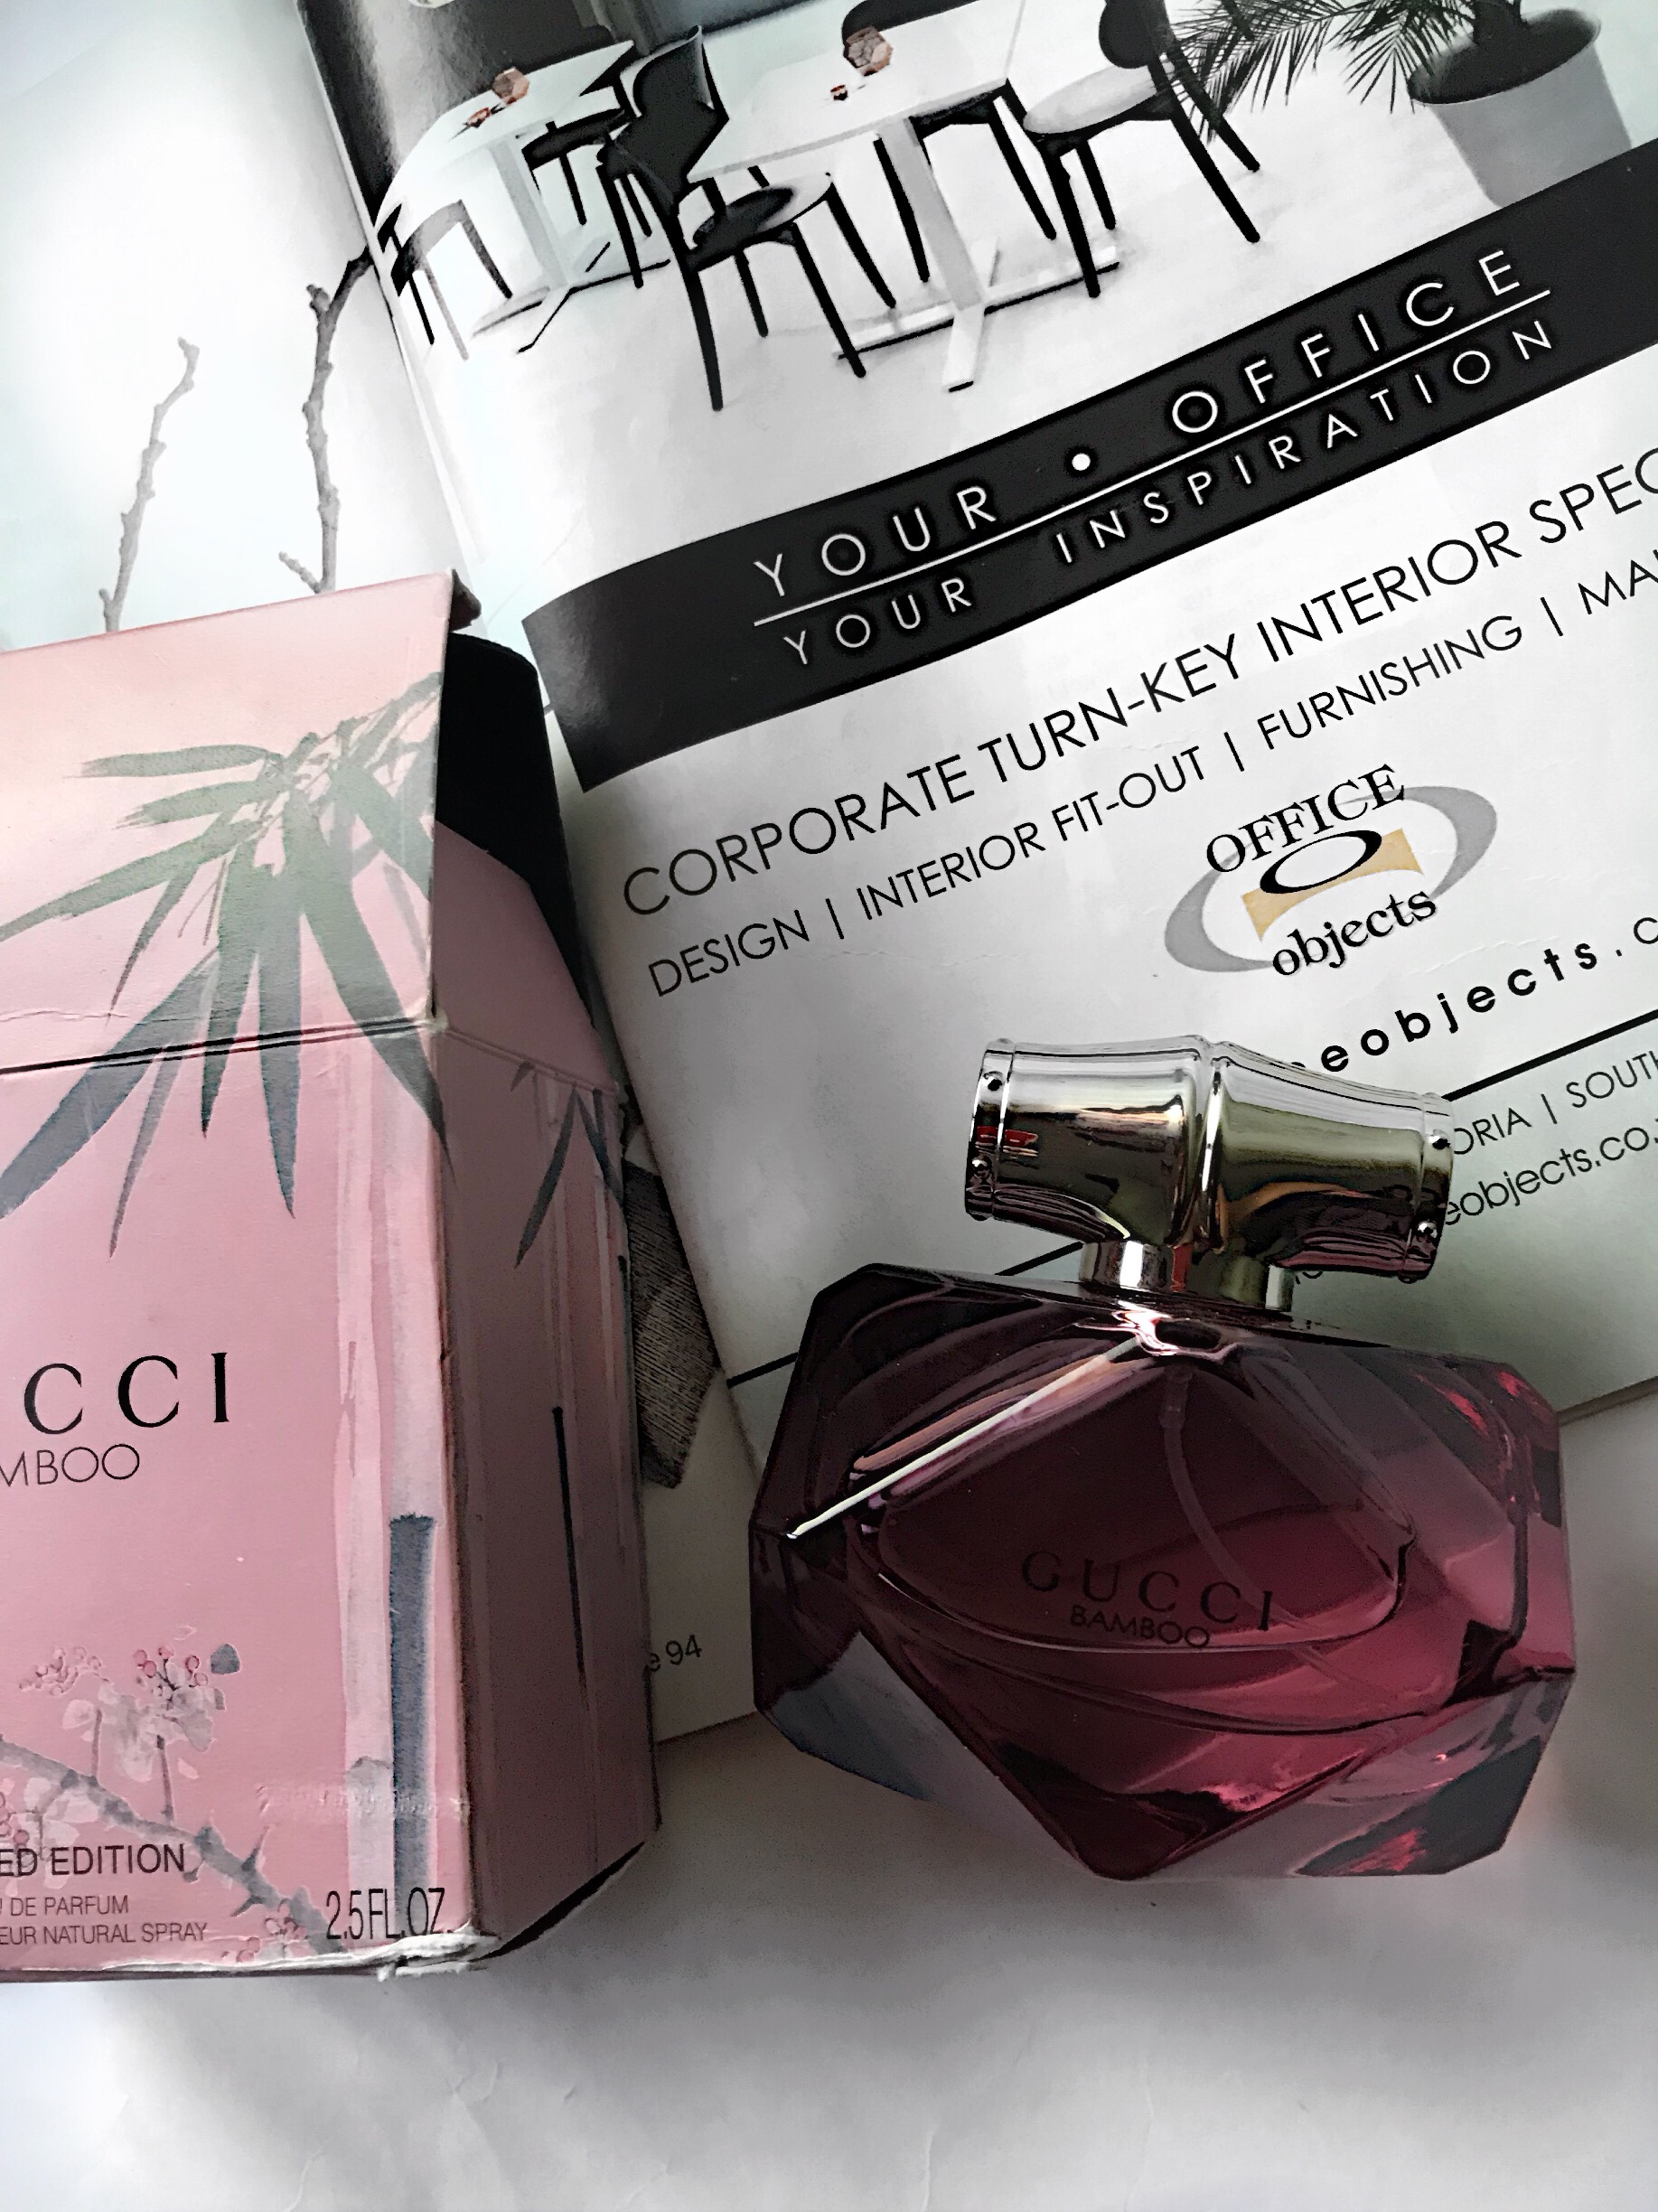 Product Review: Gucci Bamboo Perfume 